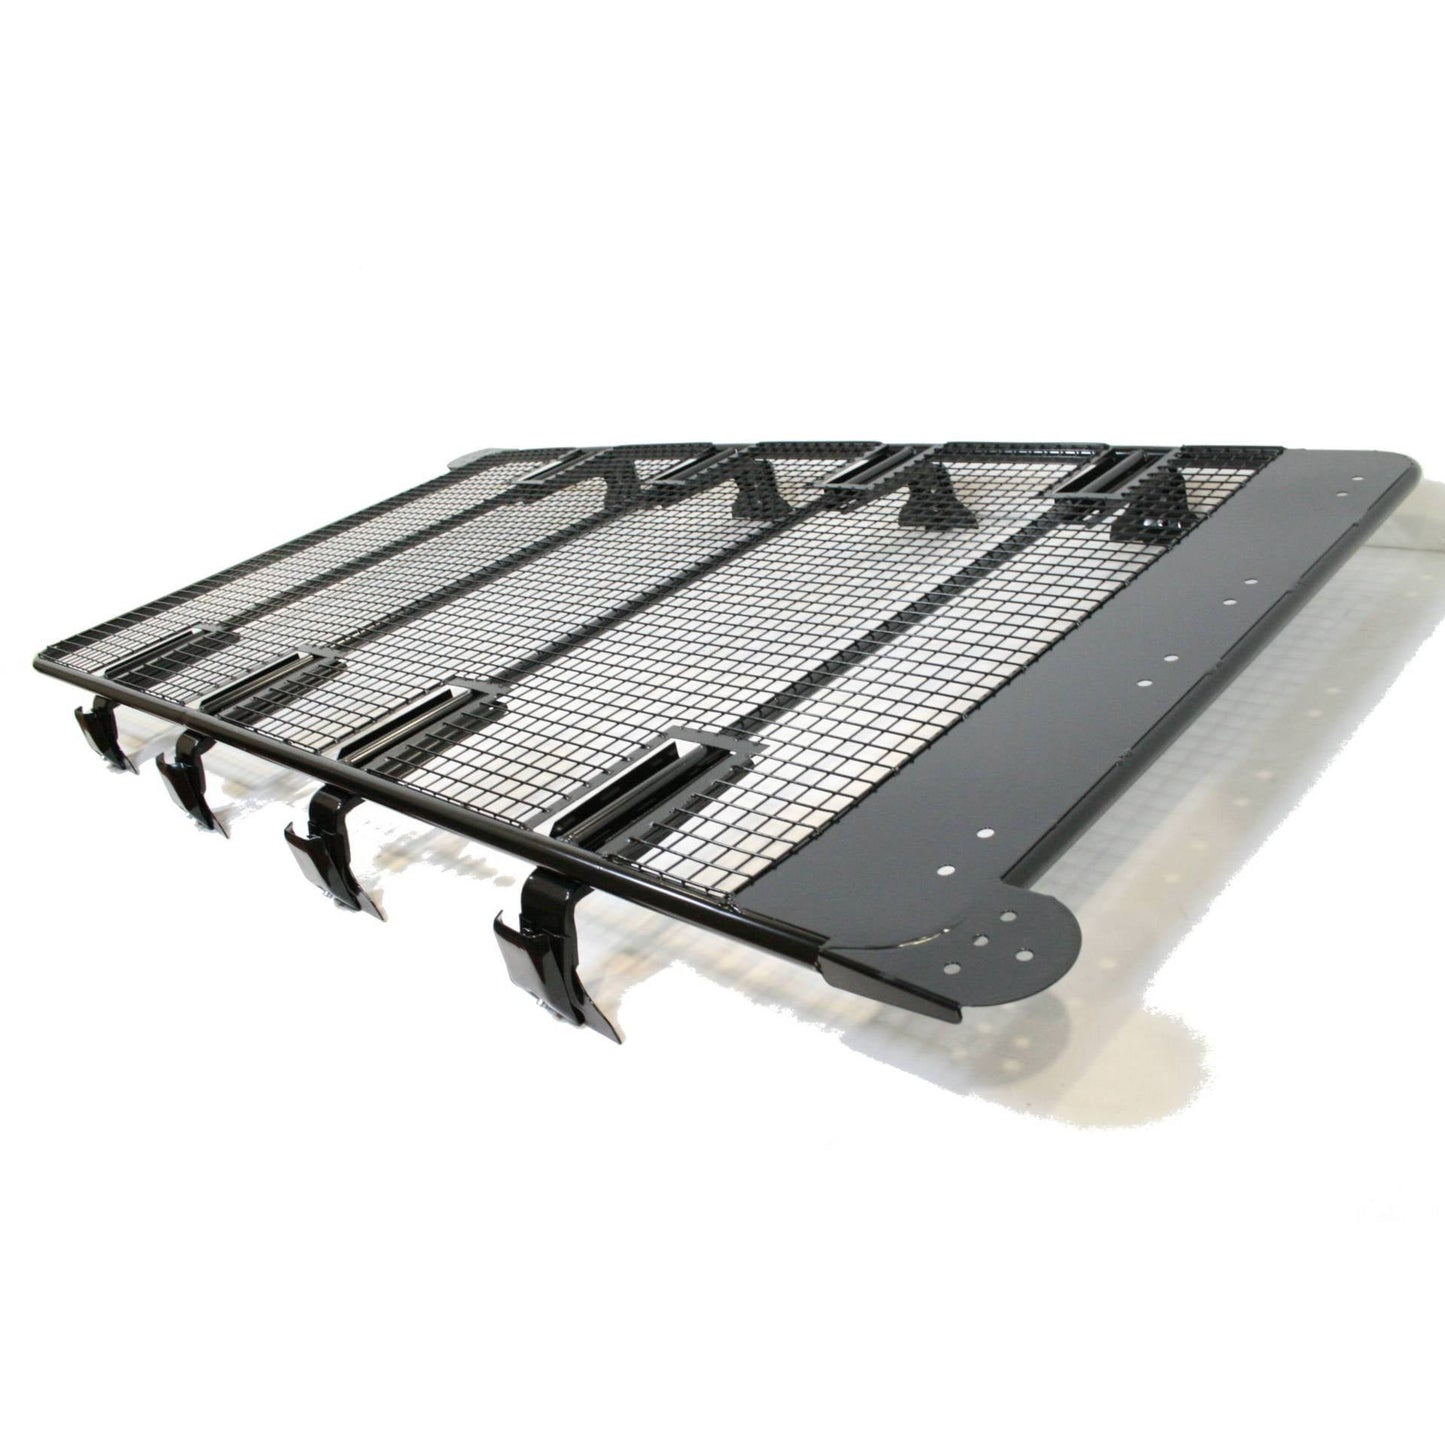 Expedition Steel Flat Roof Rack for Land Rover Defender 90 1983-2016